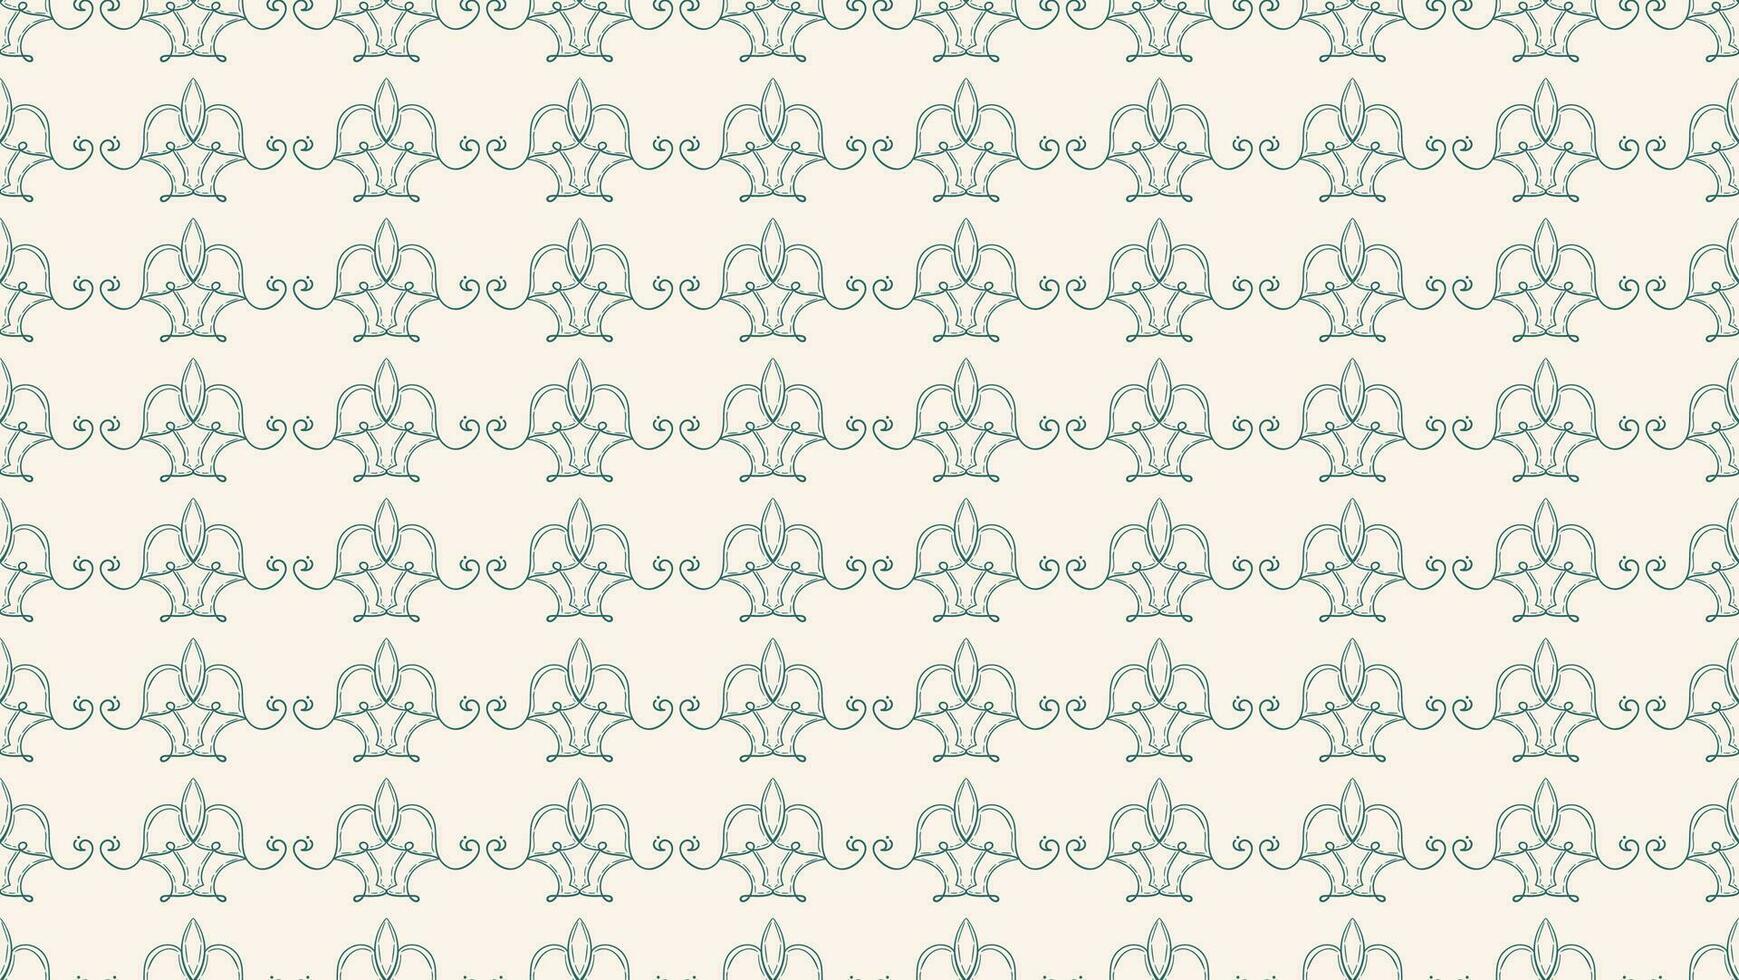 Flower petal or leaves geometric seamless pattern. For backgrounds, wallpapers, textiles, and fashion. vector